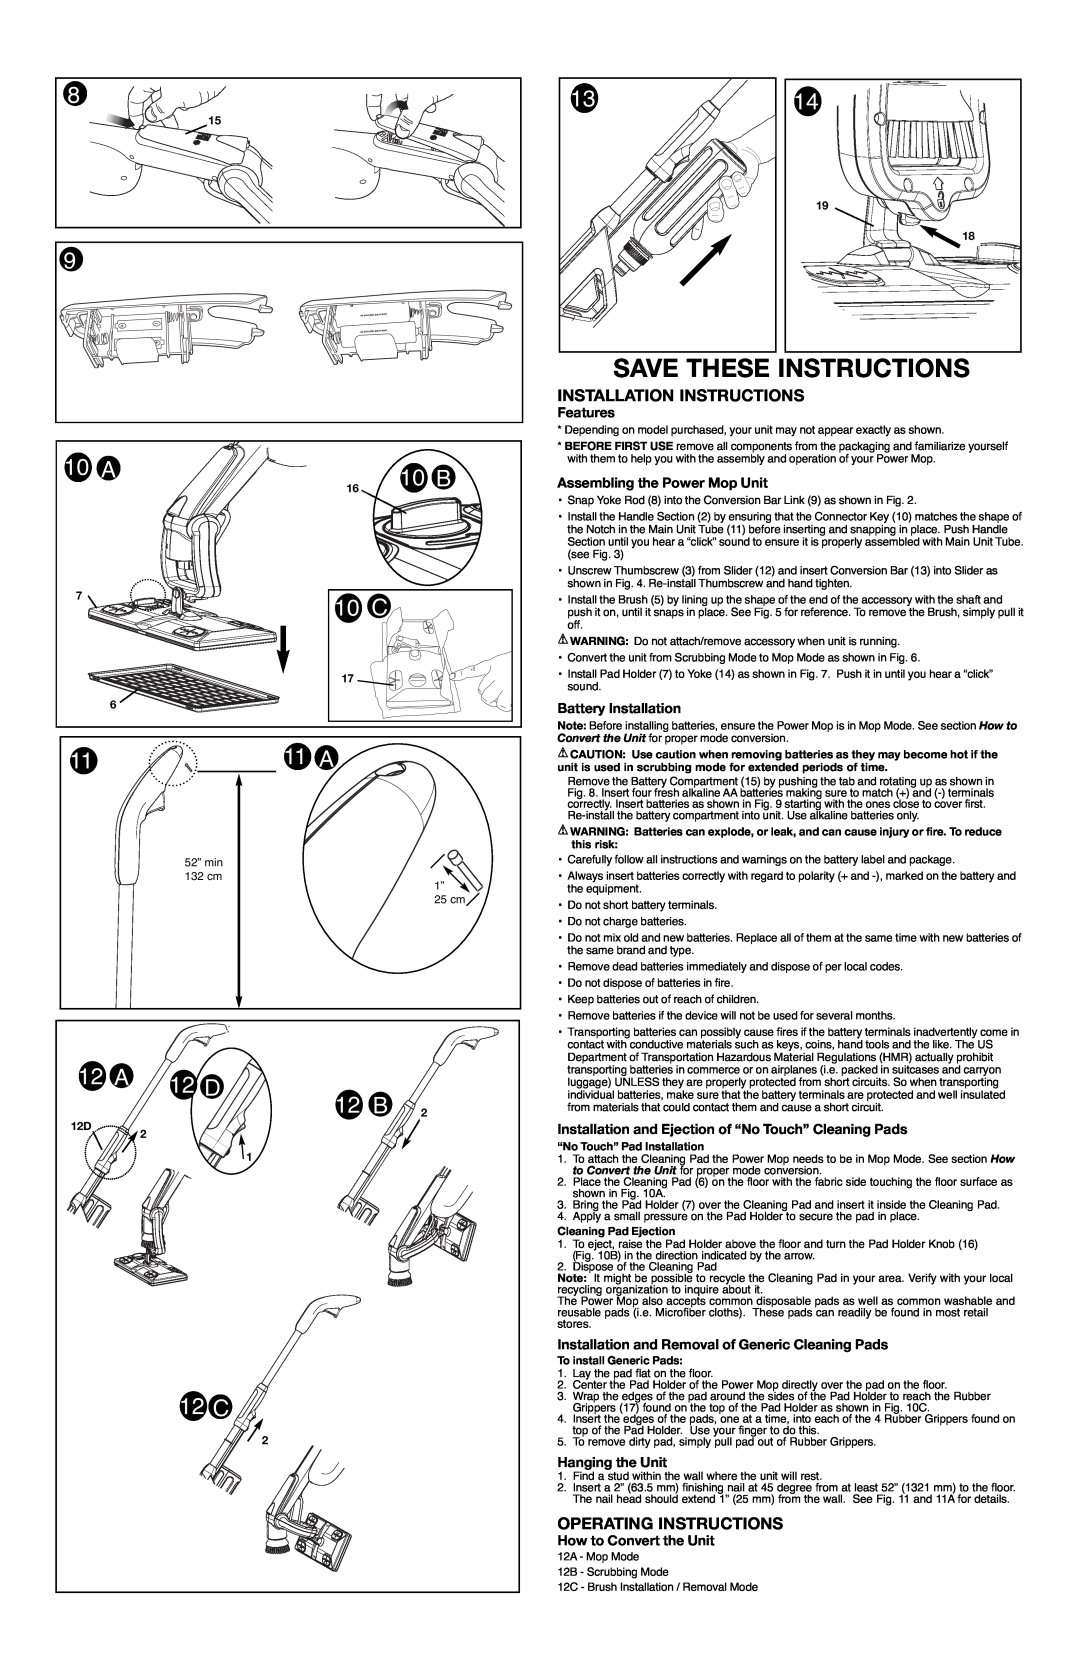 Black & Decker PM1000 Save These Instructions, Installation Instructions, Operating Instructions, 10 A, 10 B, 11 A, 12 A 